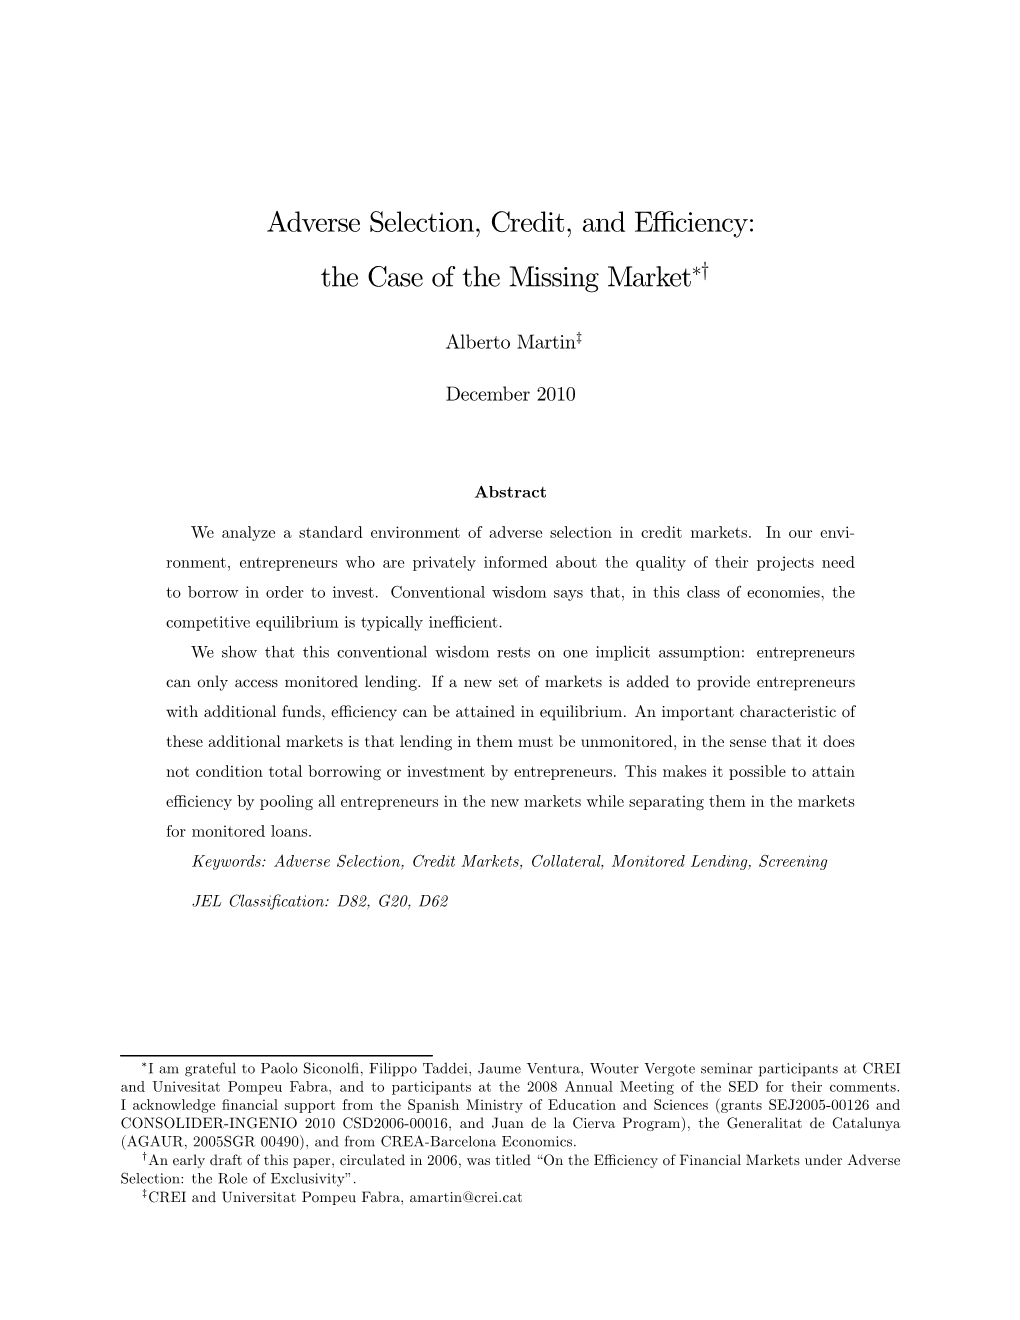 Adverse Selection, Credit, and Efficiency: the Case of The